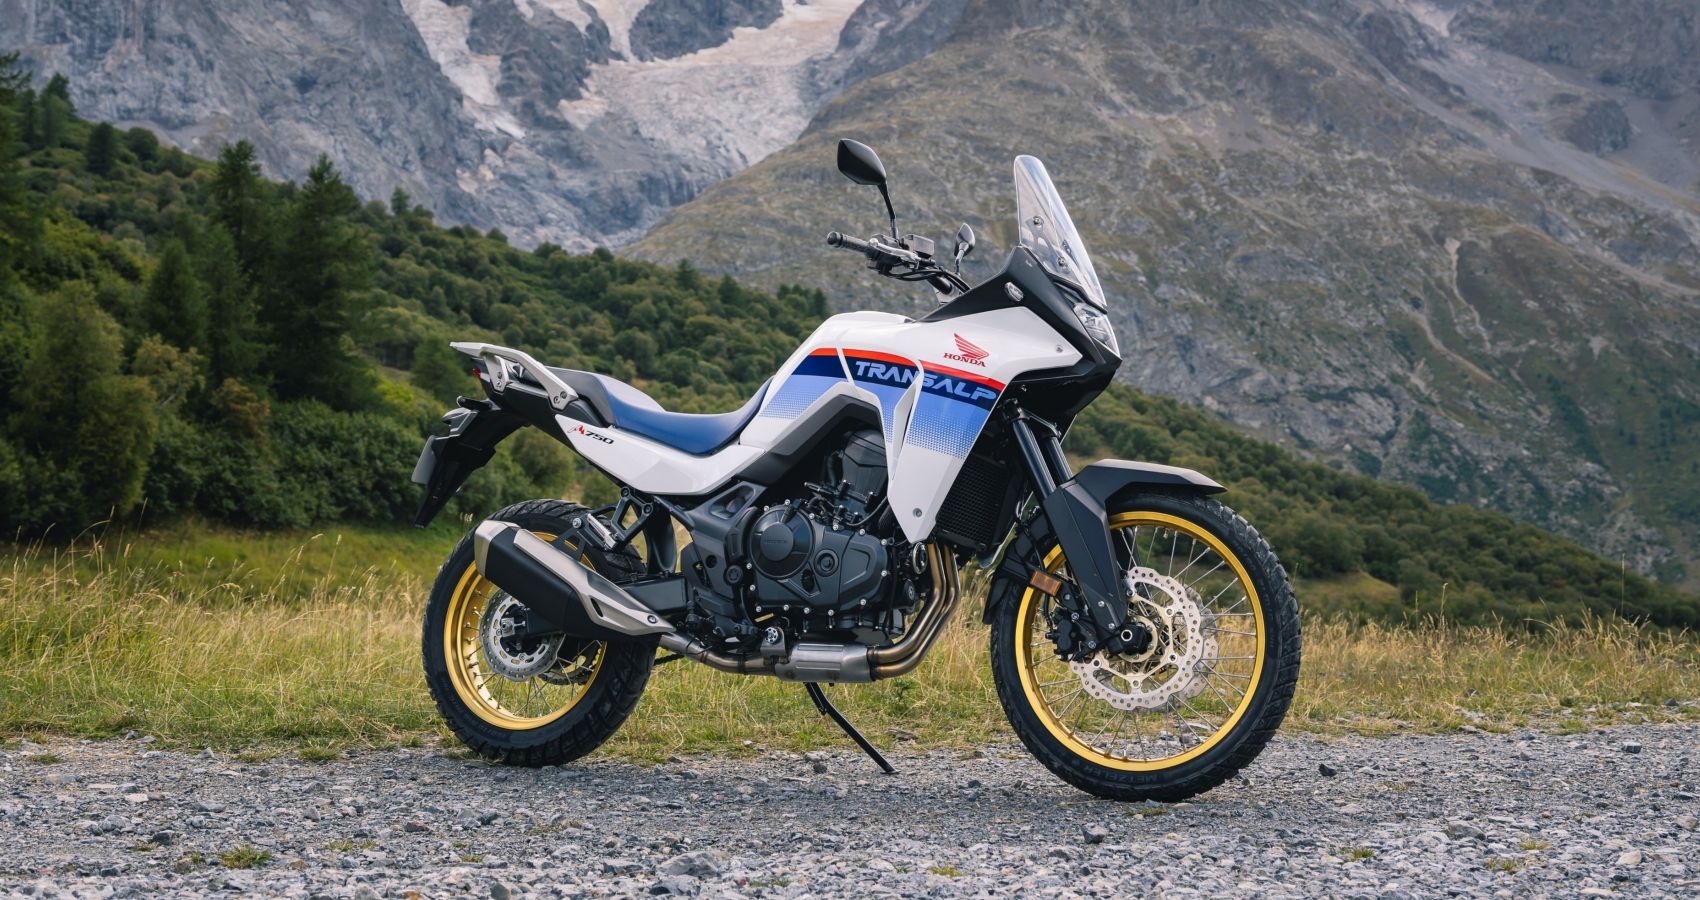 10 Reasons Why We're Excited About The 2023 Honda XL750 Transalp